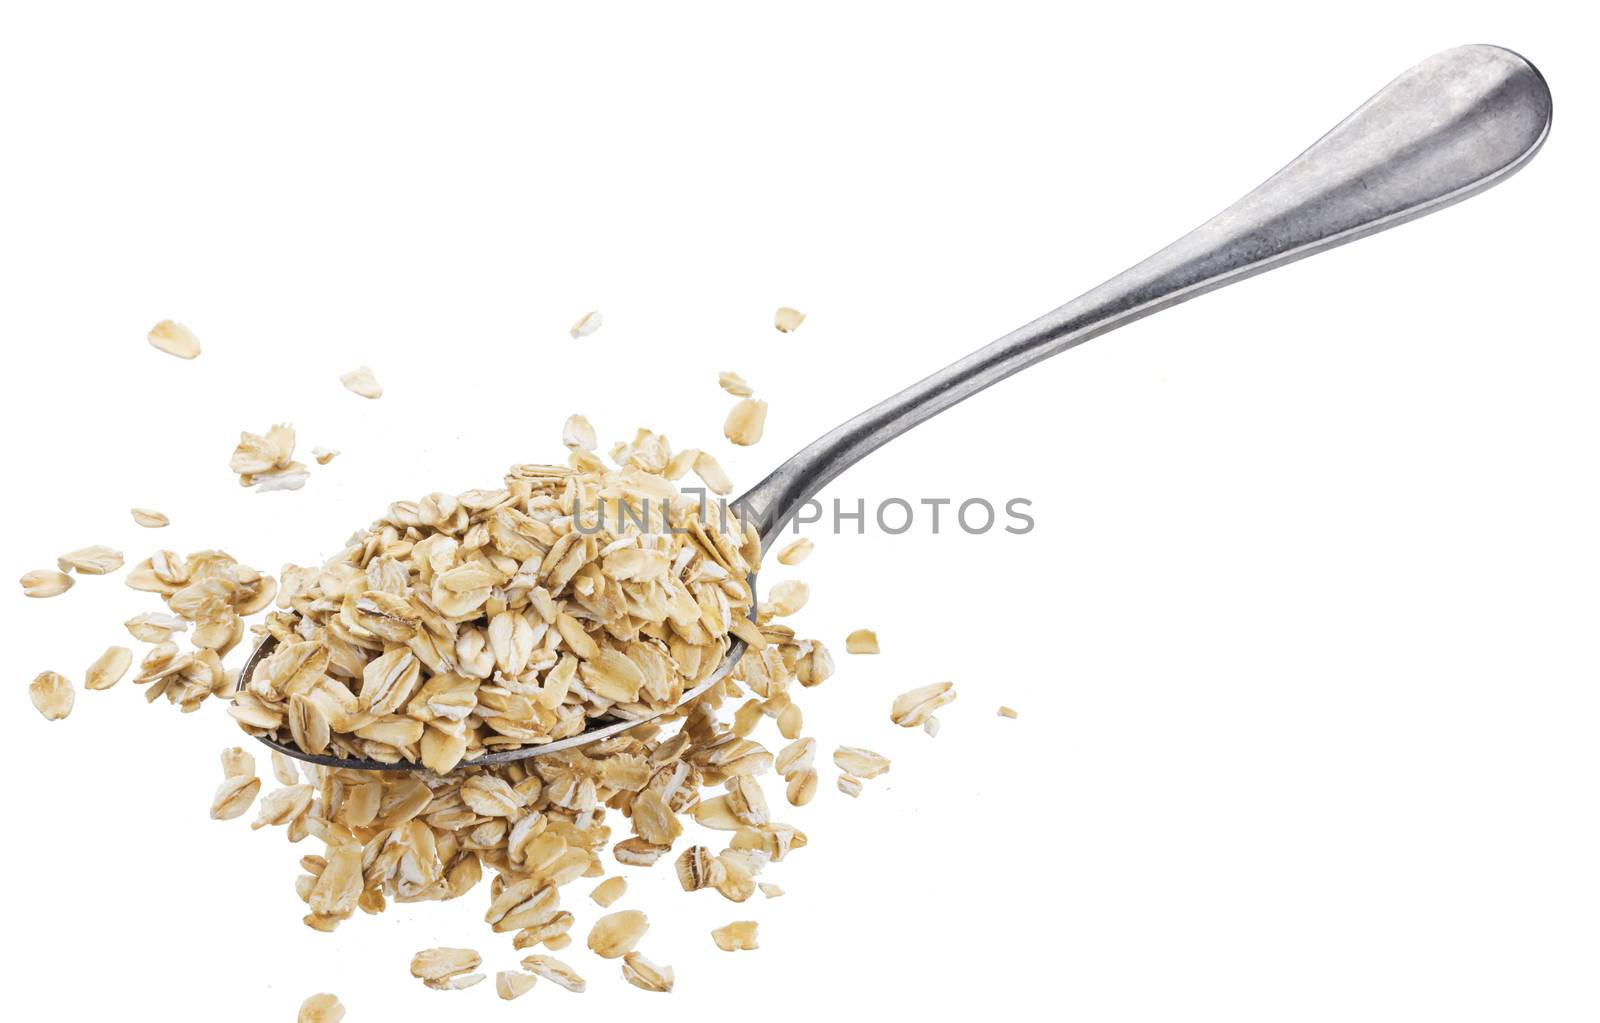 Oat flakes in spoon isolated on white background with clipping path